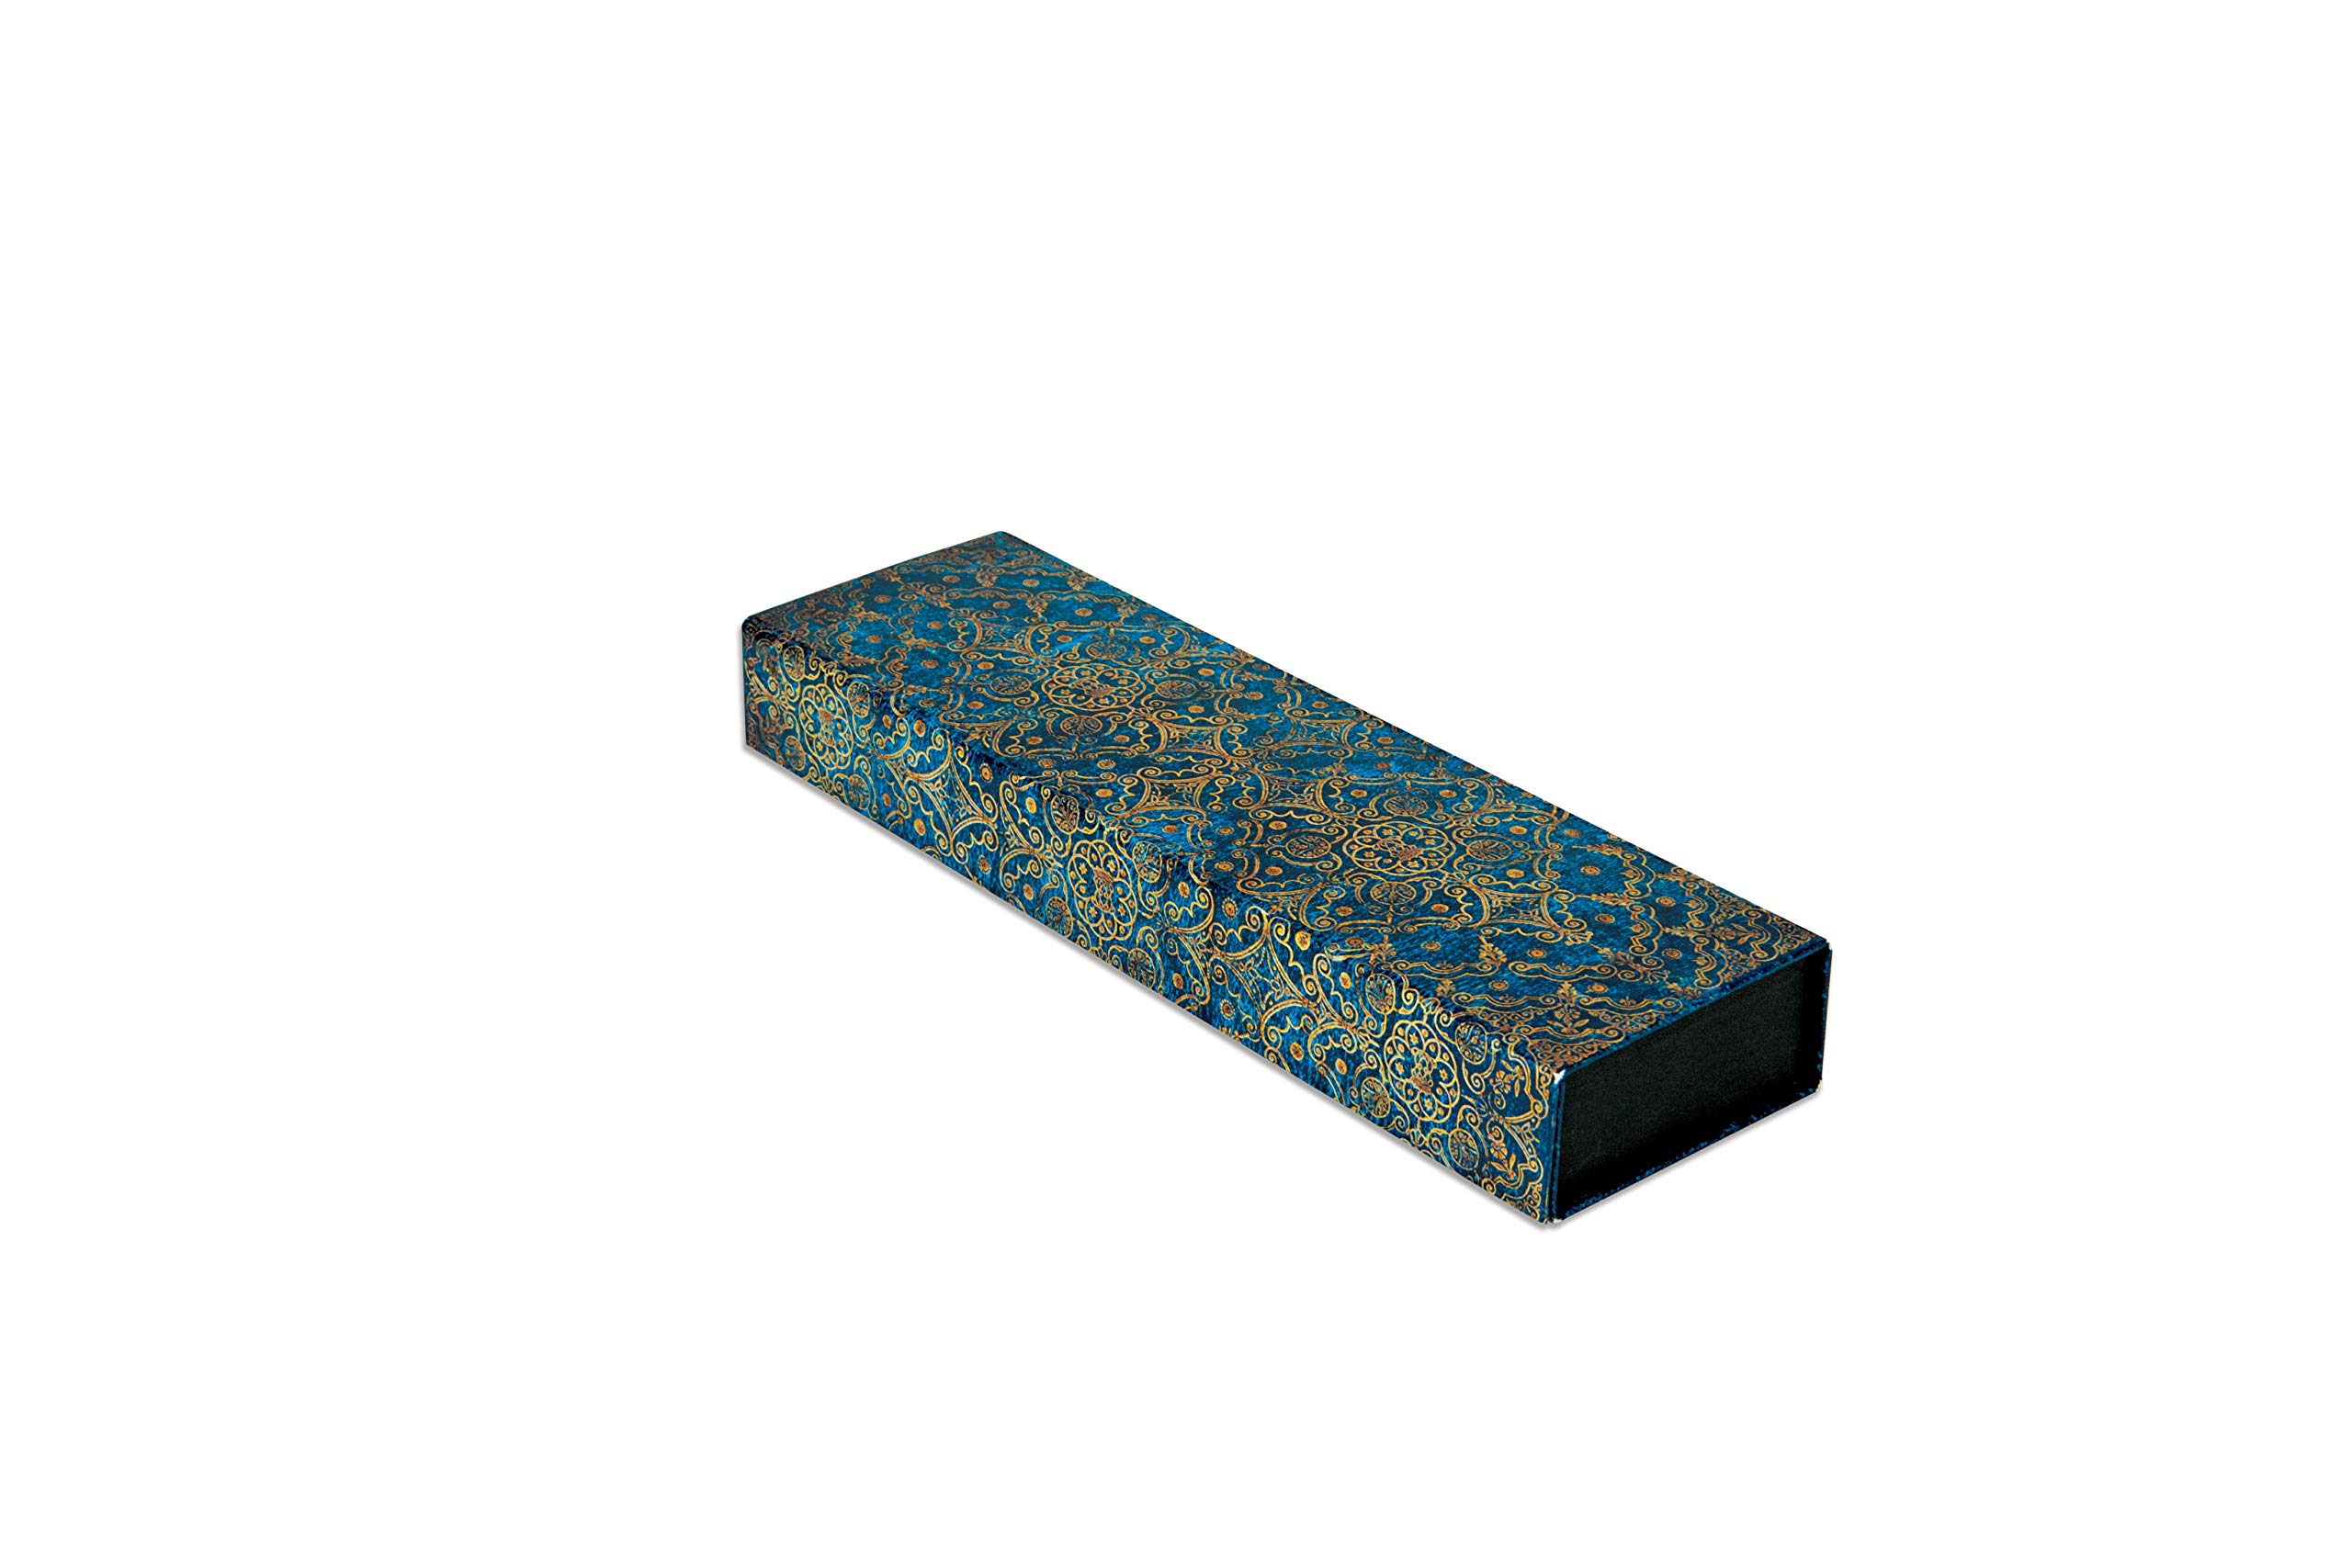 Paperblanks Pencil Case Azure : Dungeon's Gate